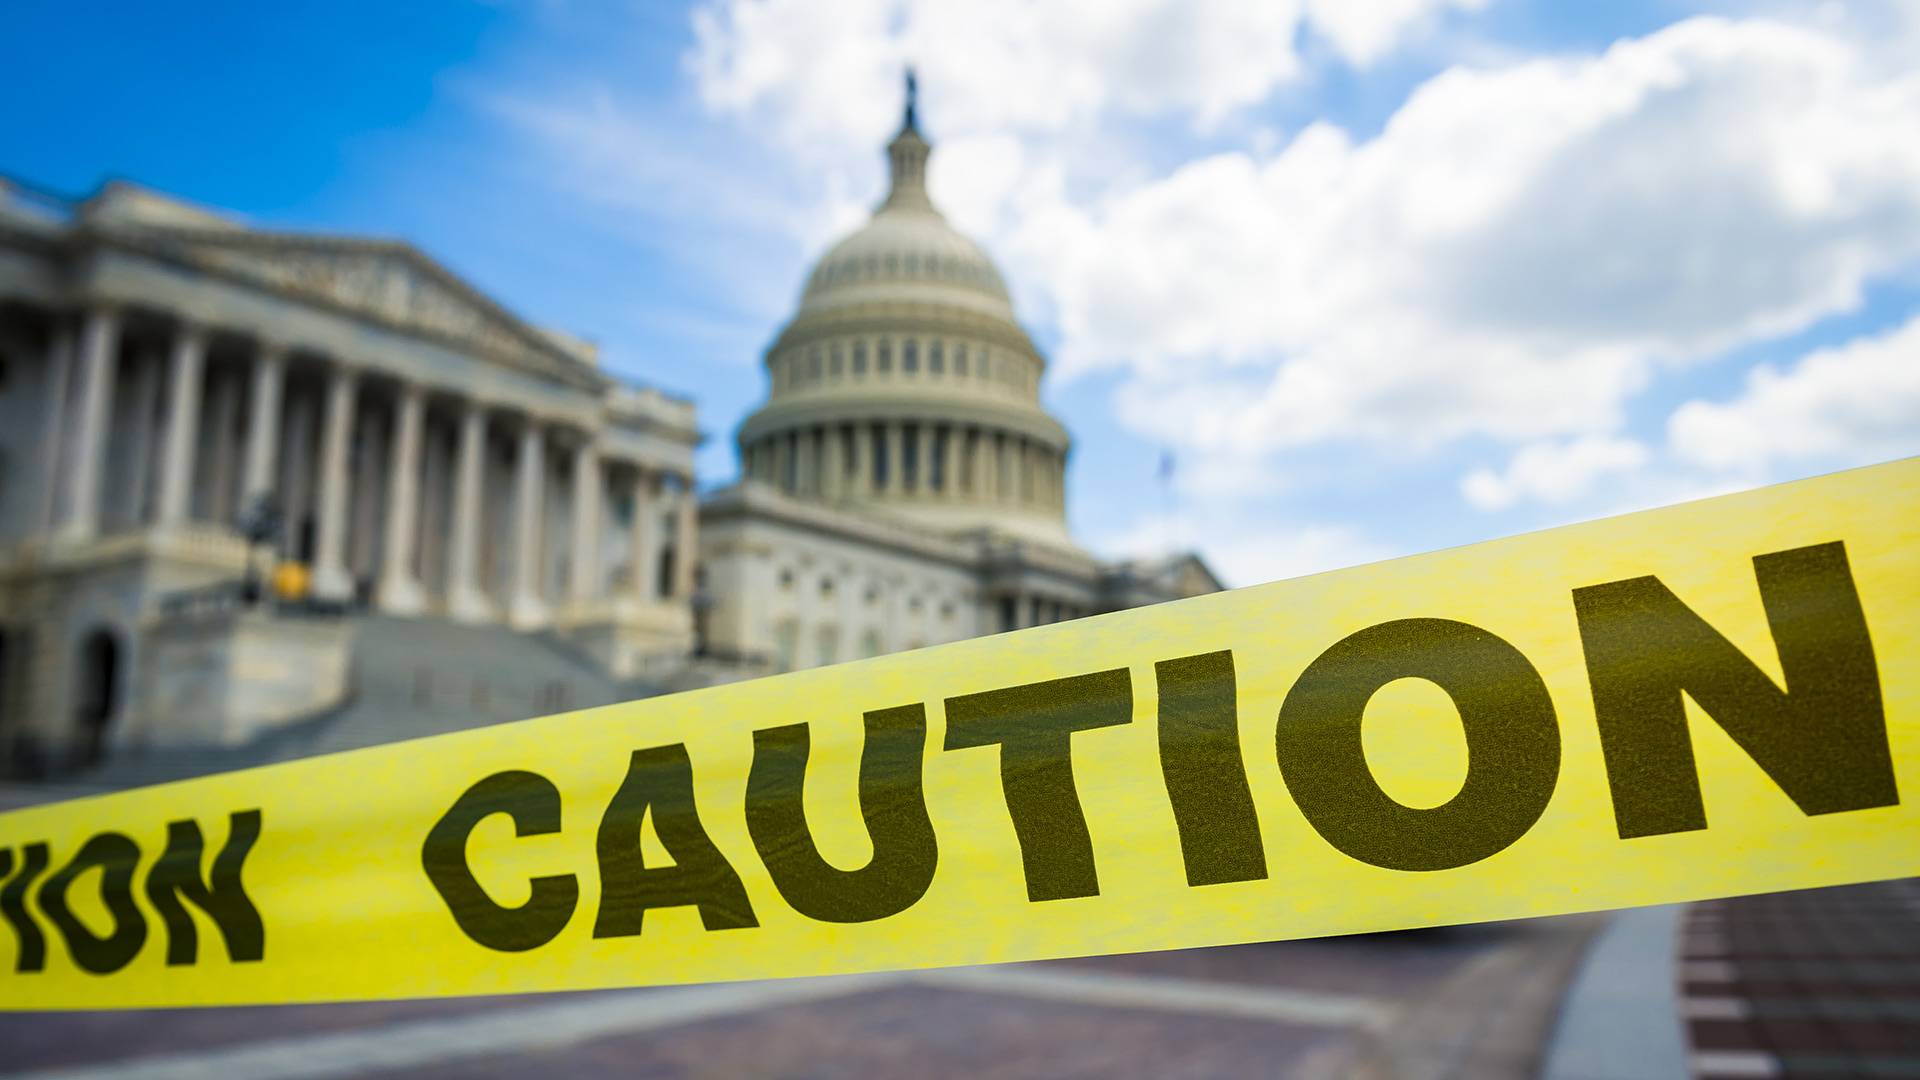 The U.S. Capitol Building with yellow caution tape.